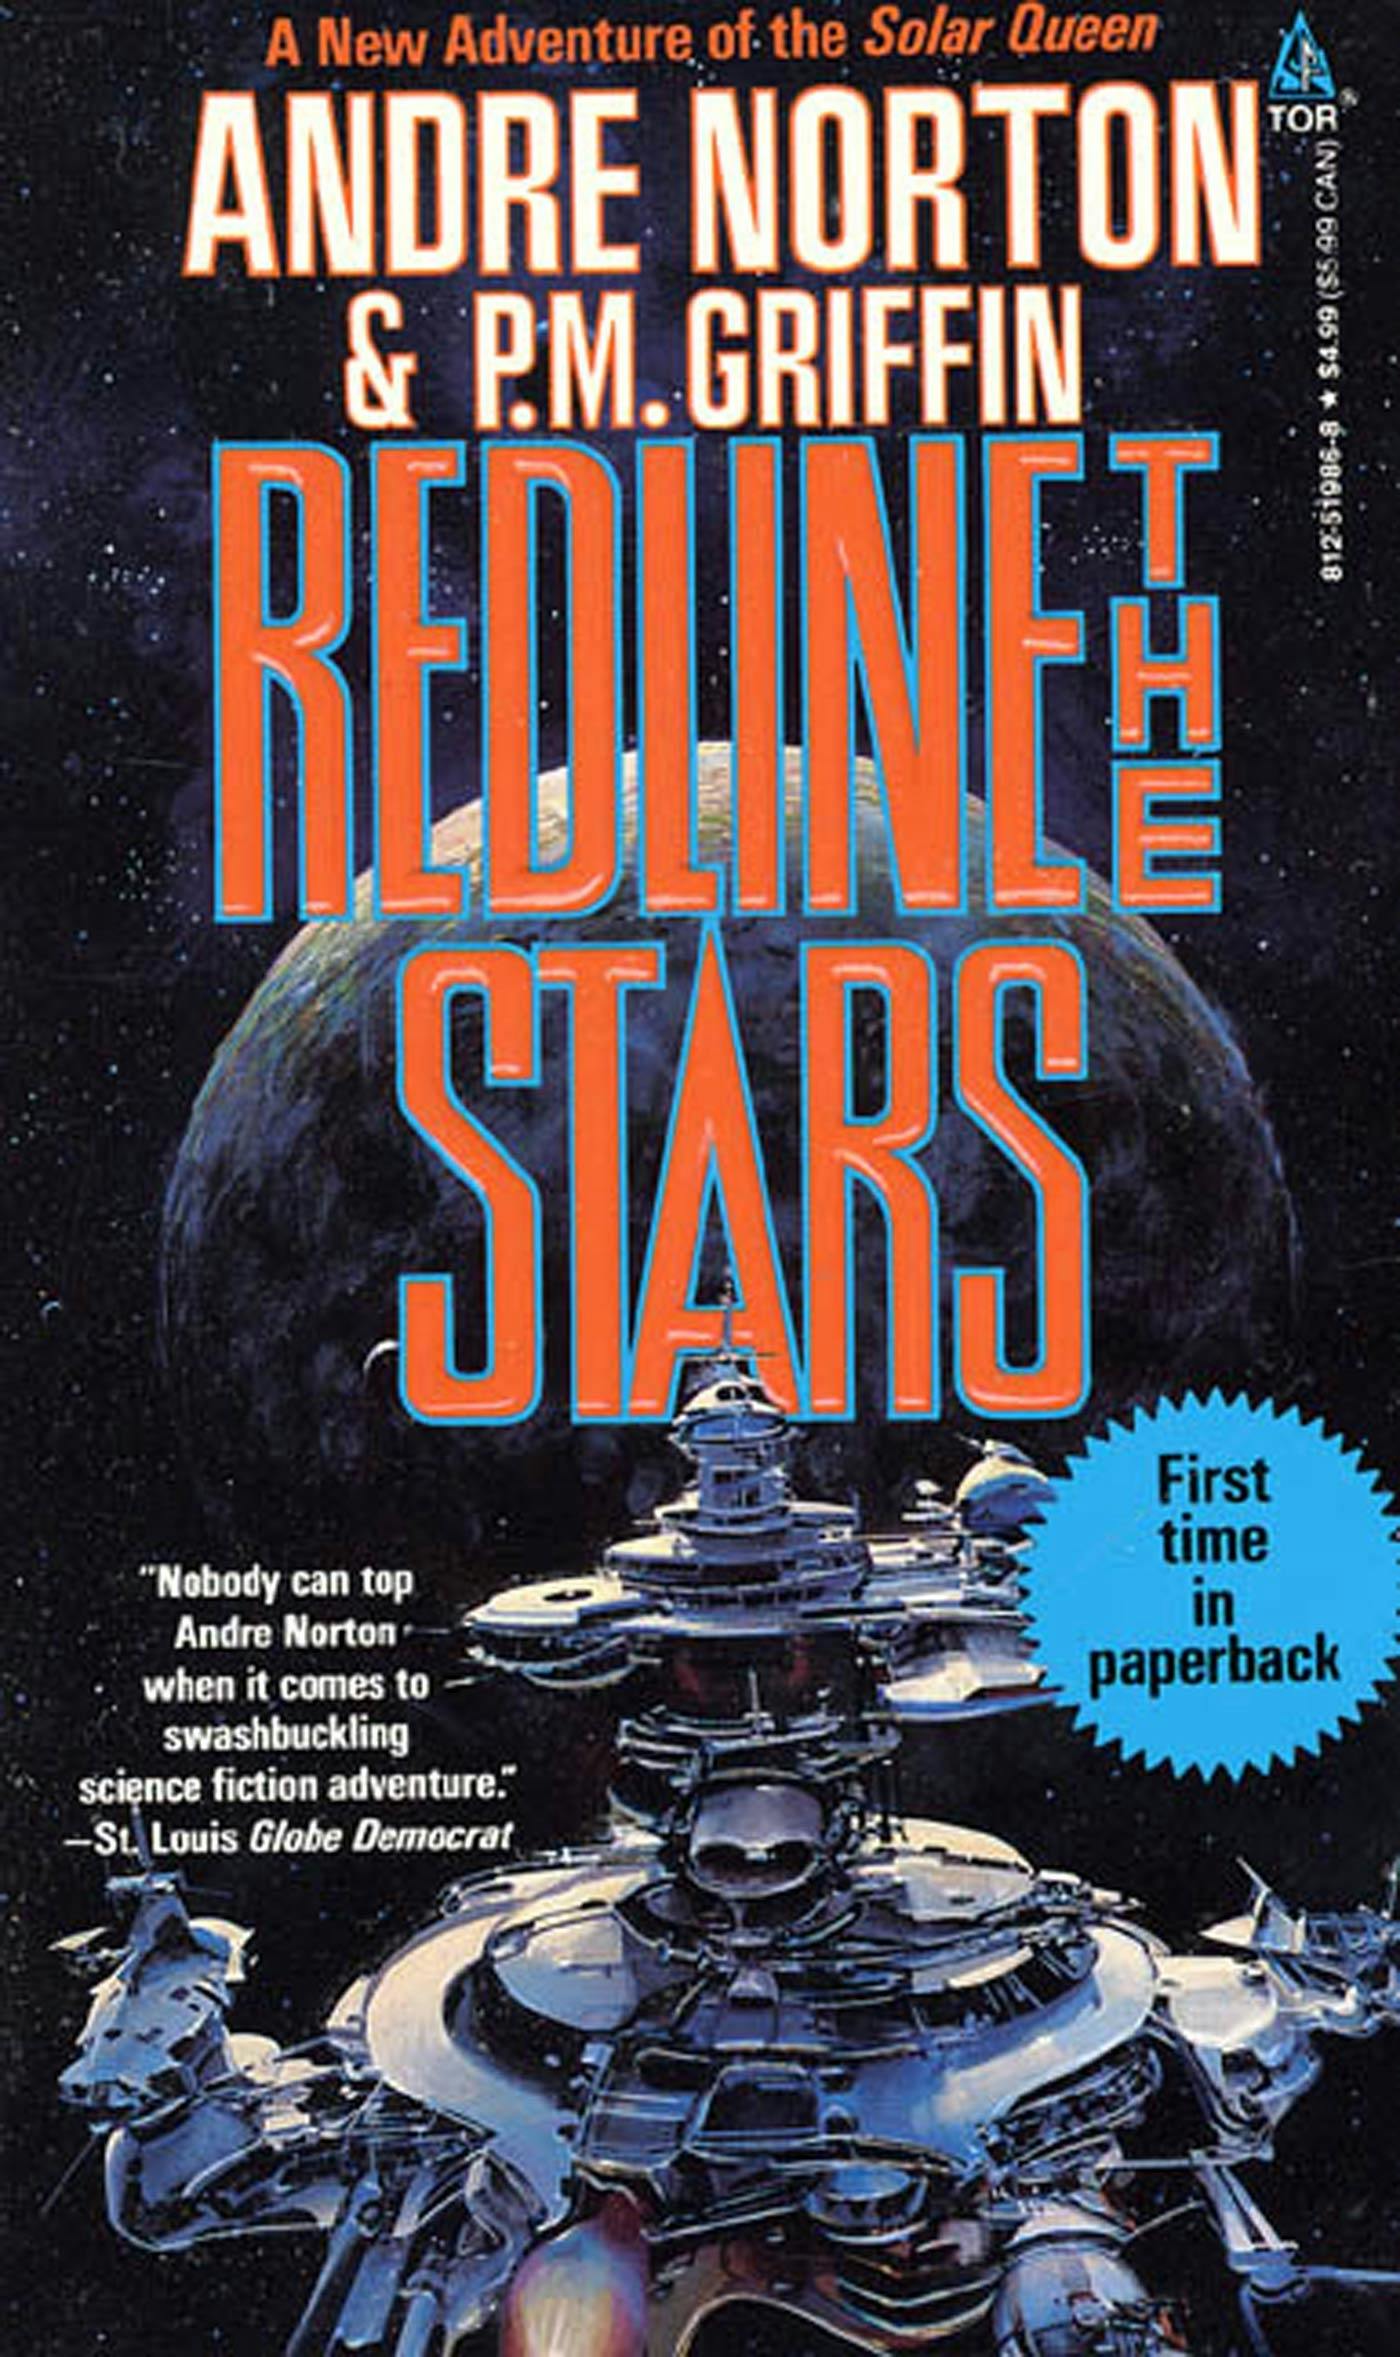 Cover for the book titled as: Redline the Stars